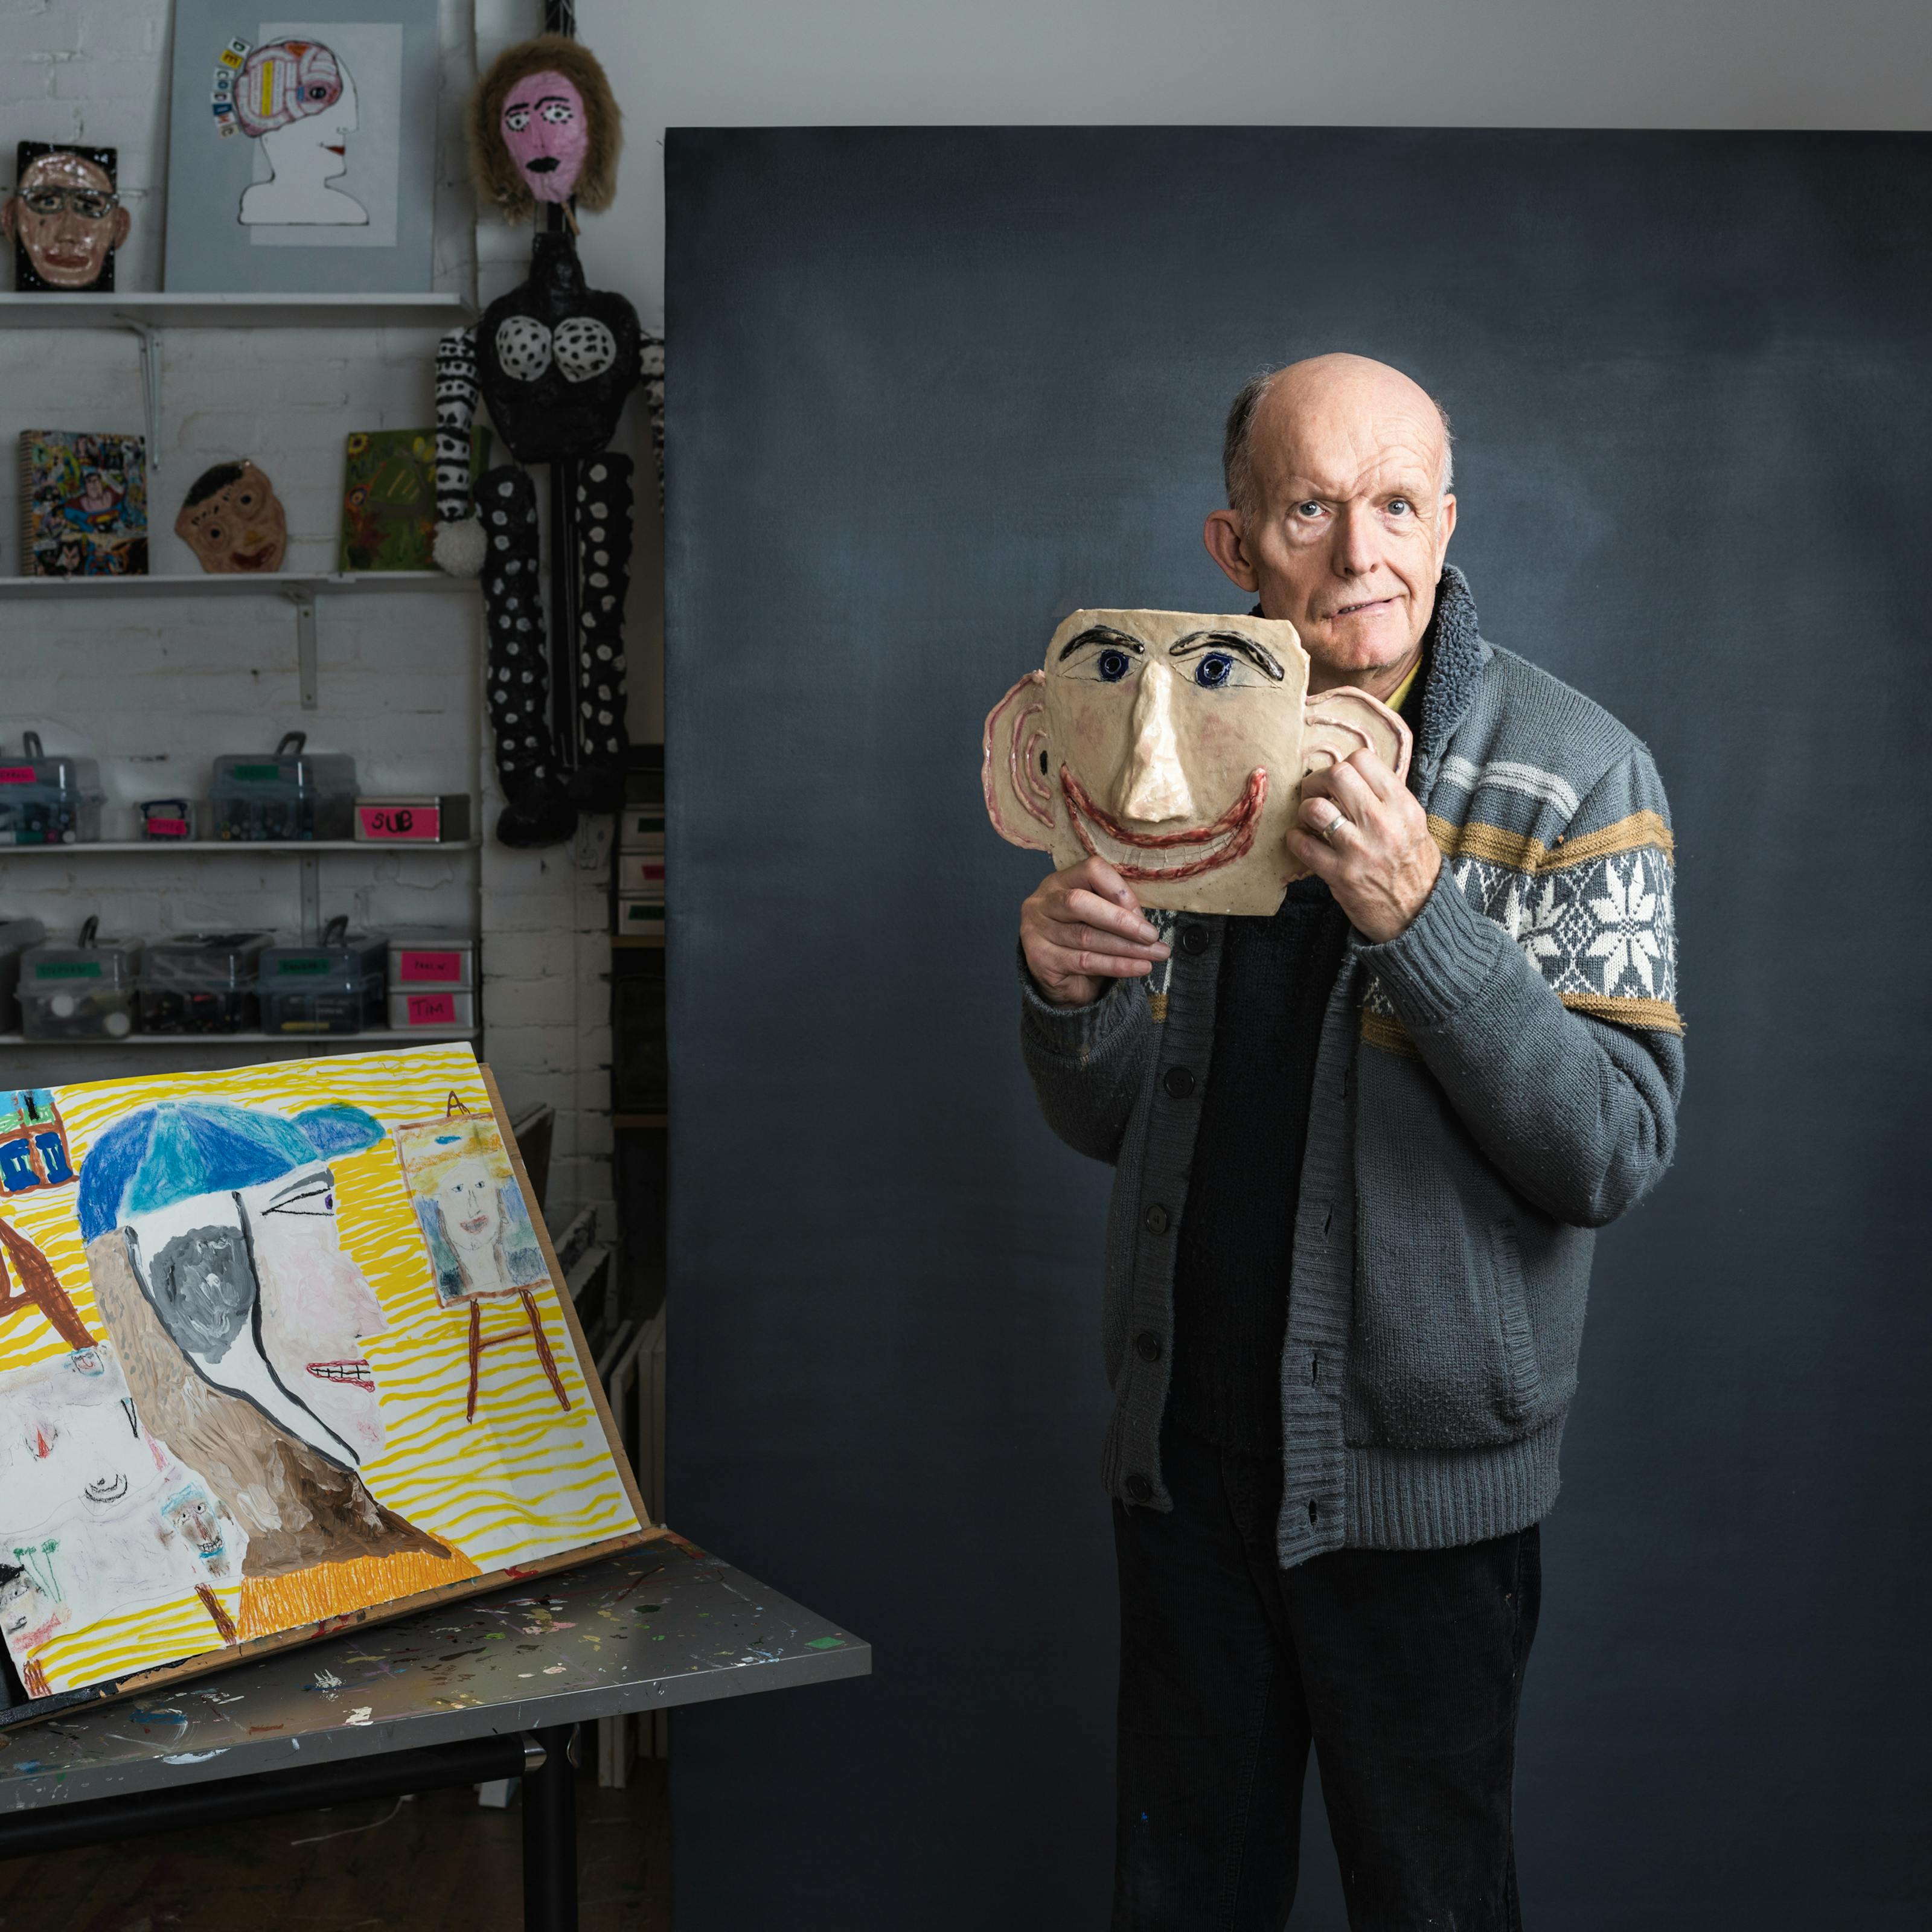 Photograph of stroke survivor and artist Chris Miller in an artist studio. A grey textured background frames the artist as he holds a ceramic of a head, which acts as a cartoon likeness of his own face. Miller’s gaze is directed towards the viewer.  In the background of the studio the room is layered with artworks. To the left of the frame is a yellow painting on a table top easel.